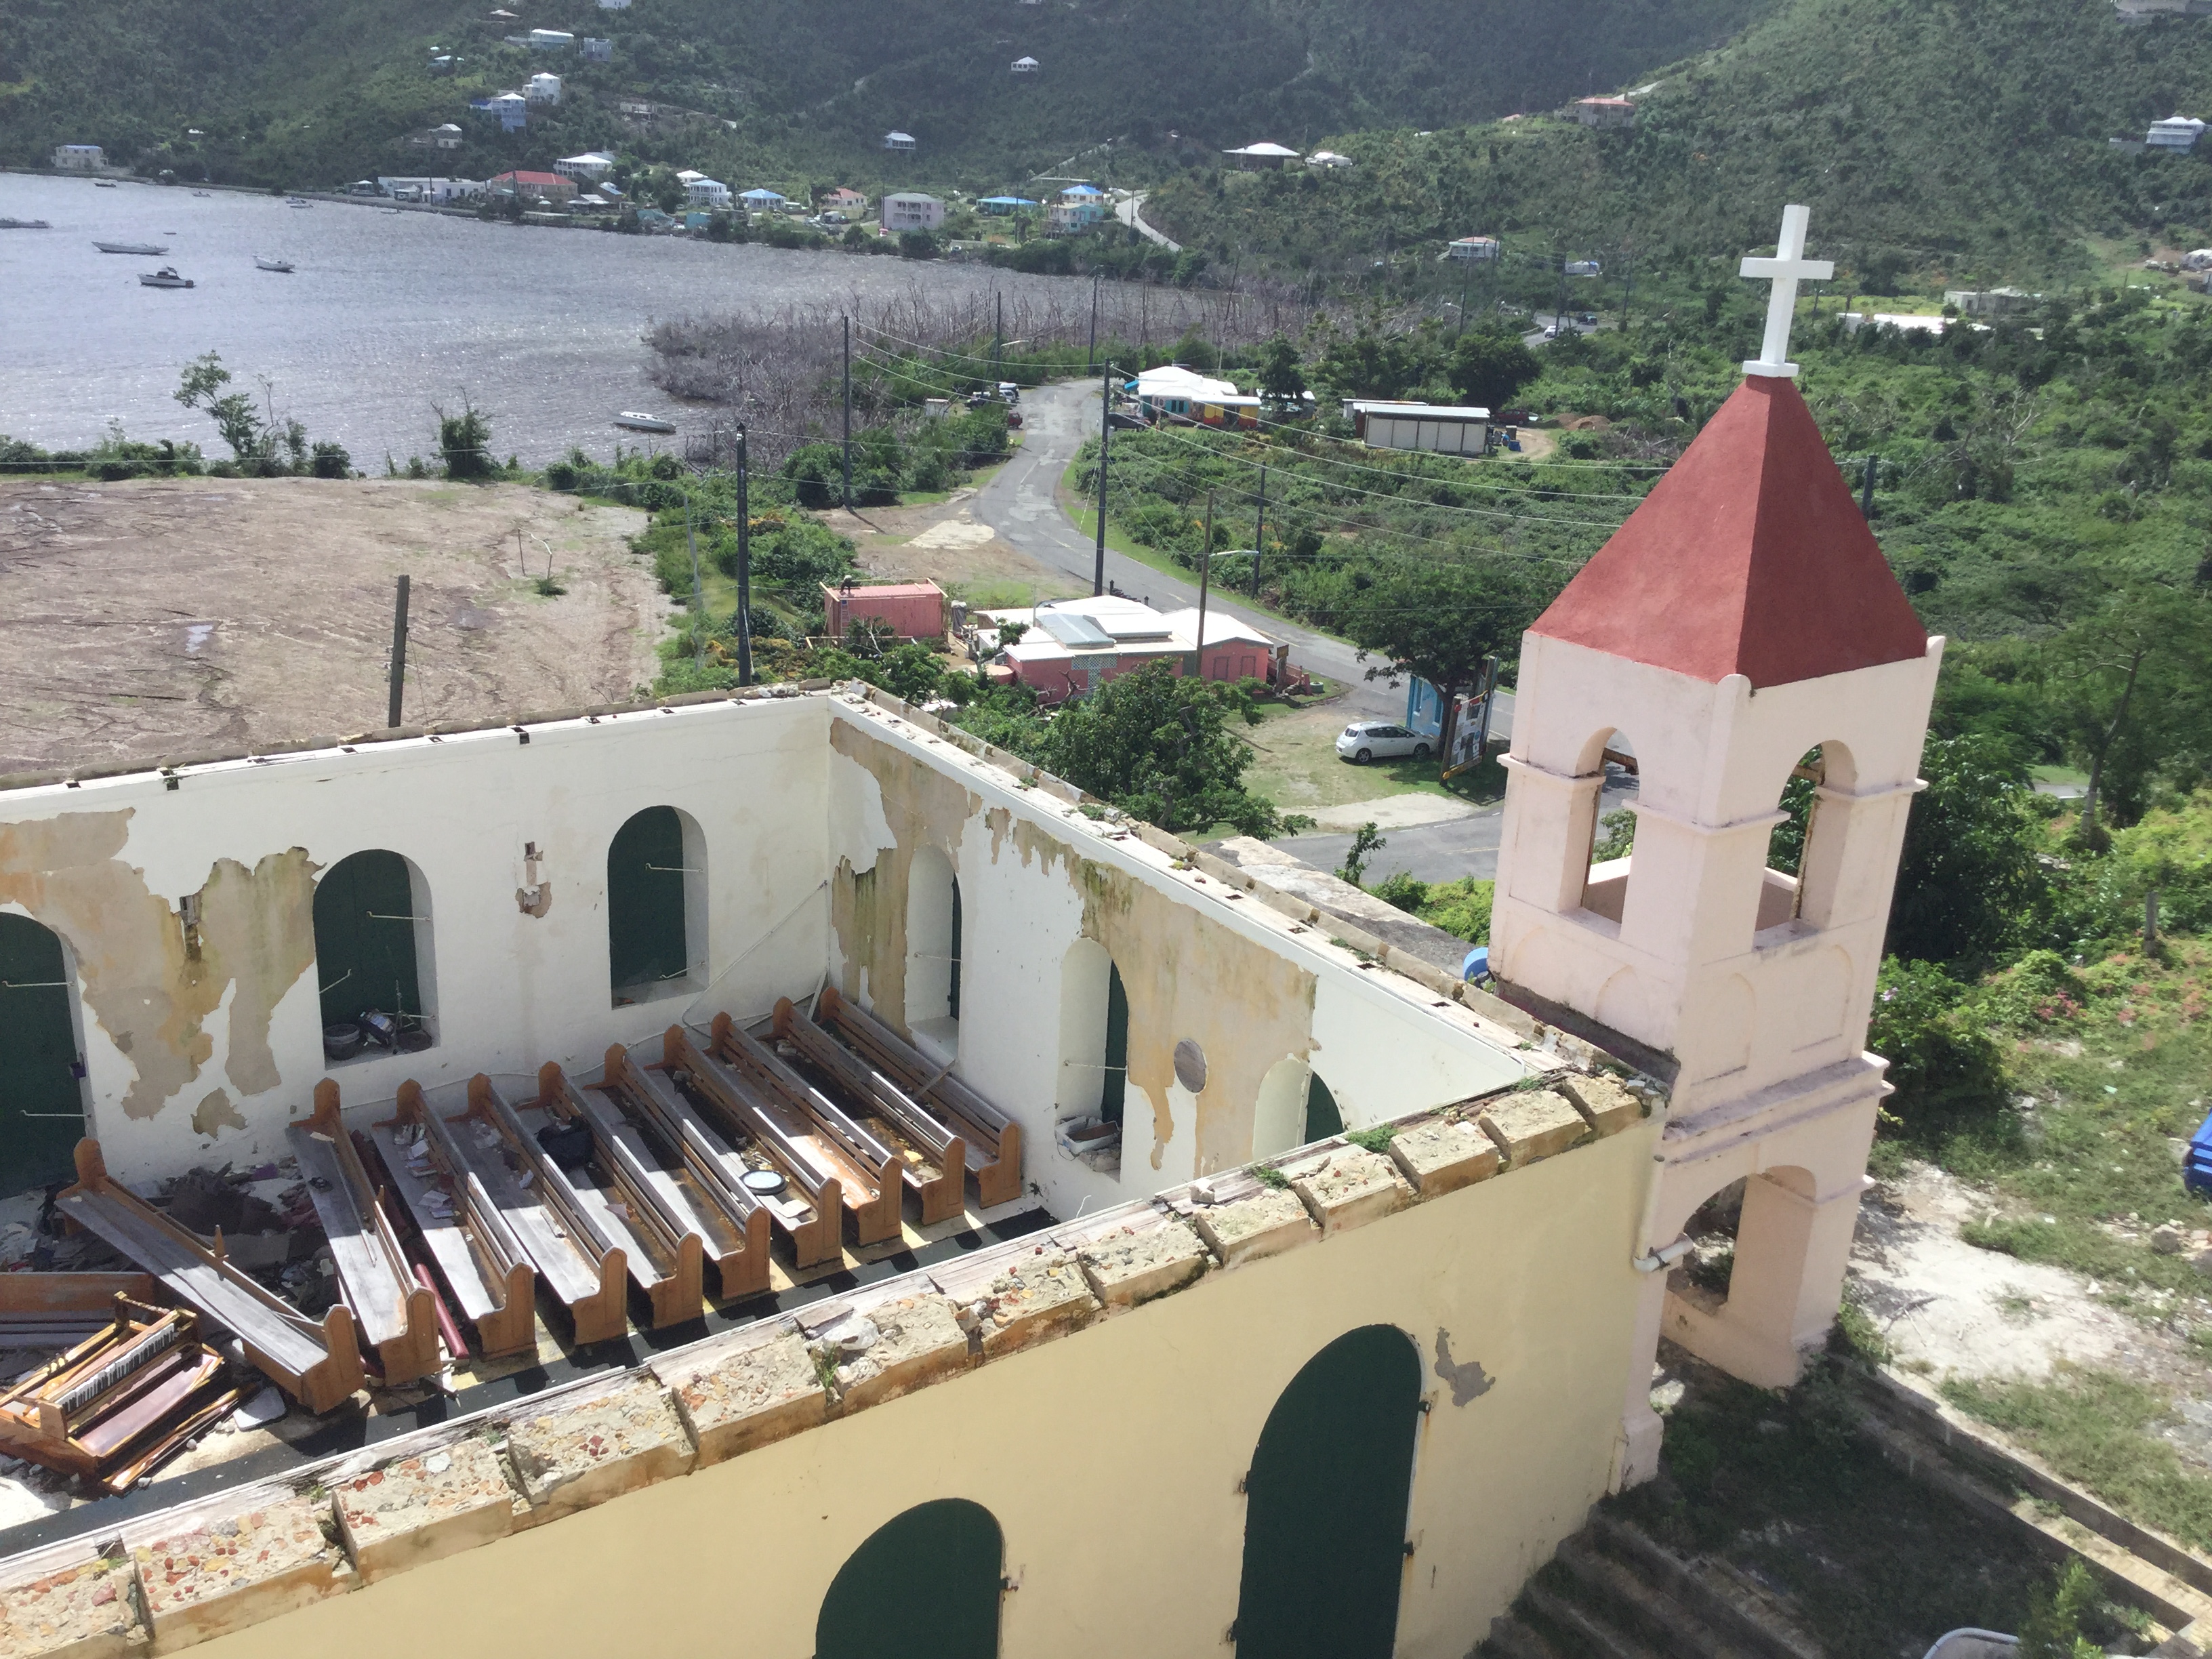 NPS Gives $10 Million Grant To VI For Historic Resources Damaged By 2017 Hurricanes